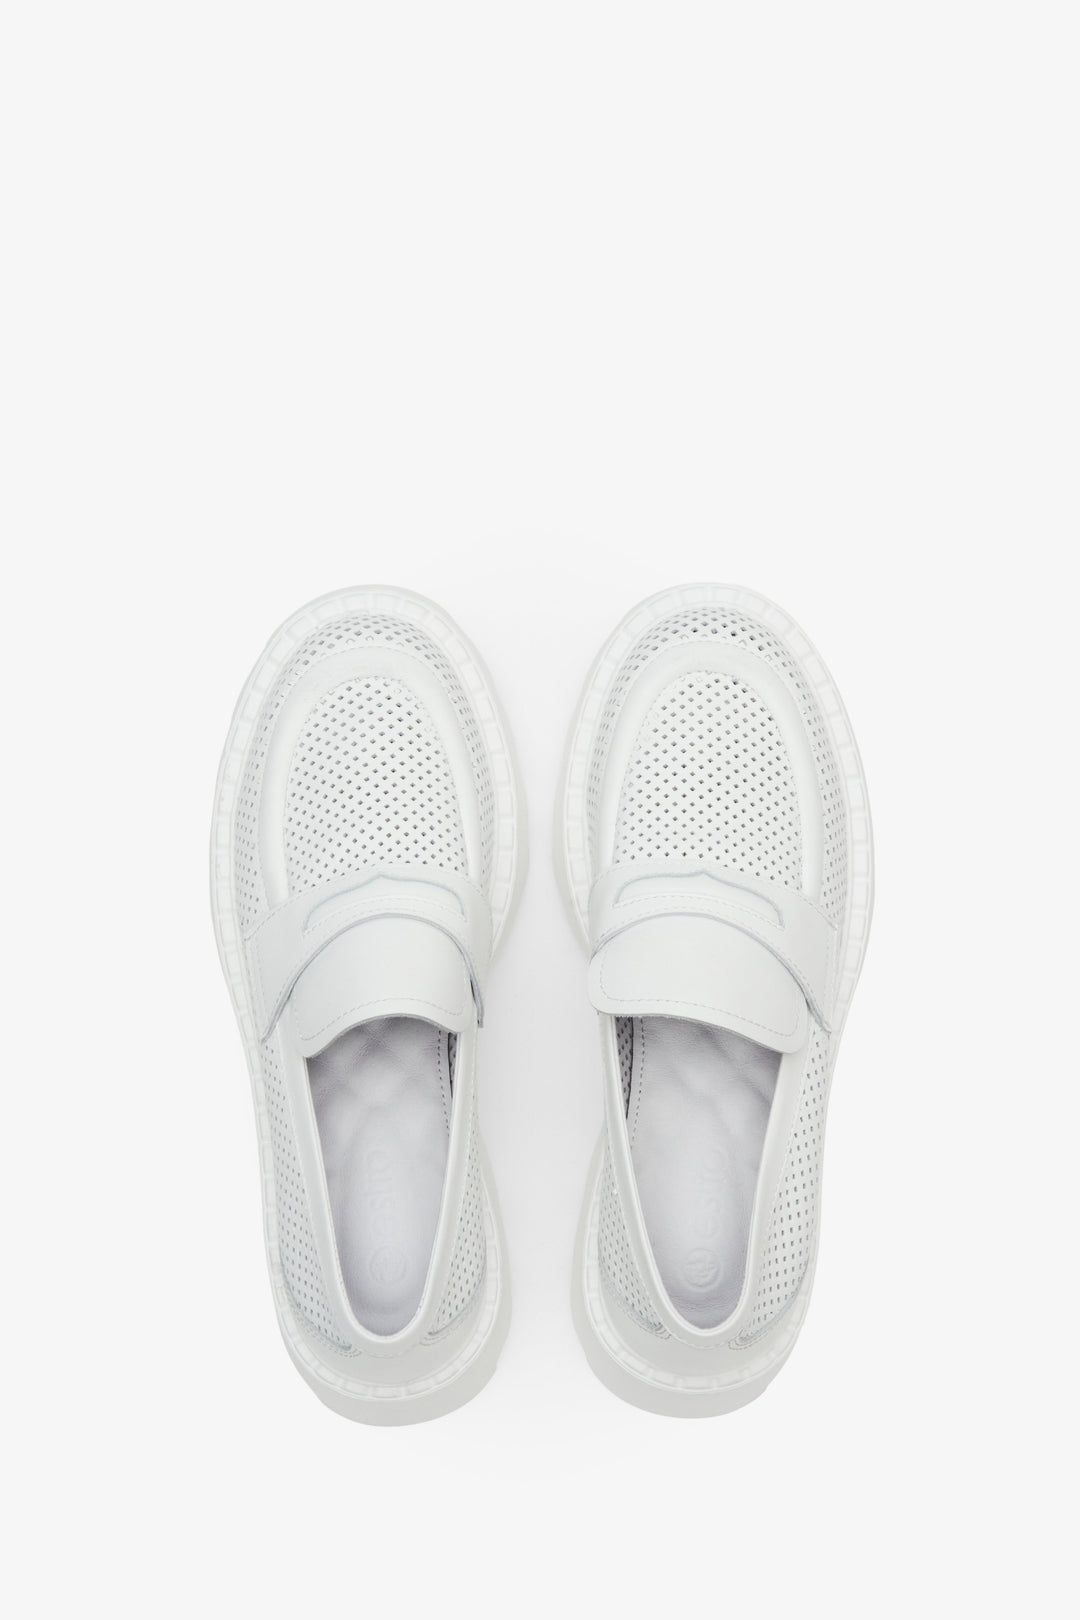 Women's leather loafers with perforation in white color - shoe presentation from above.